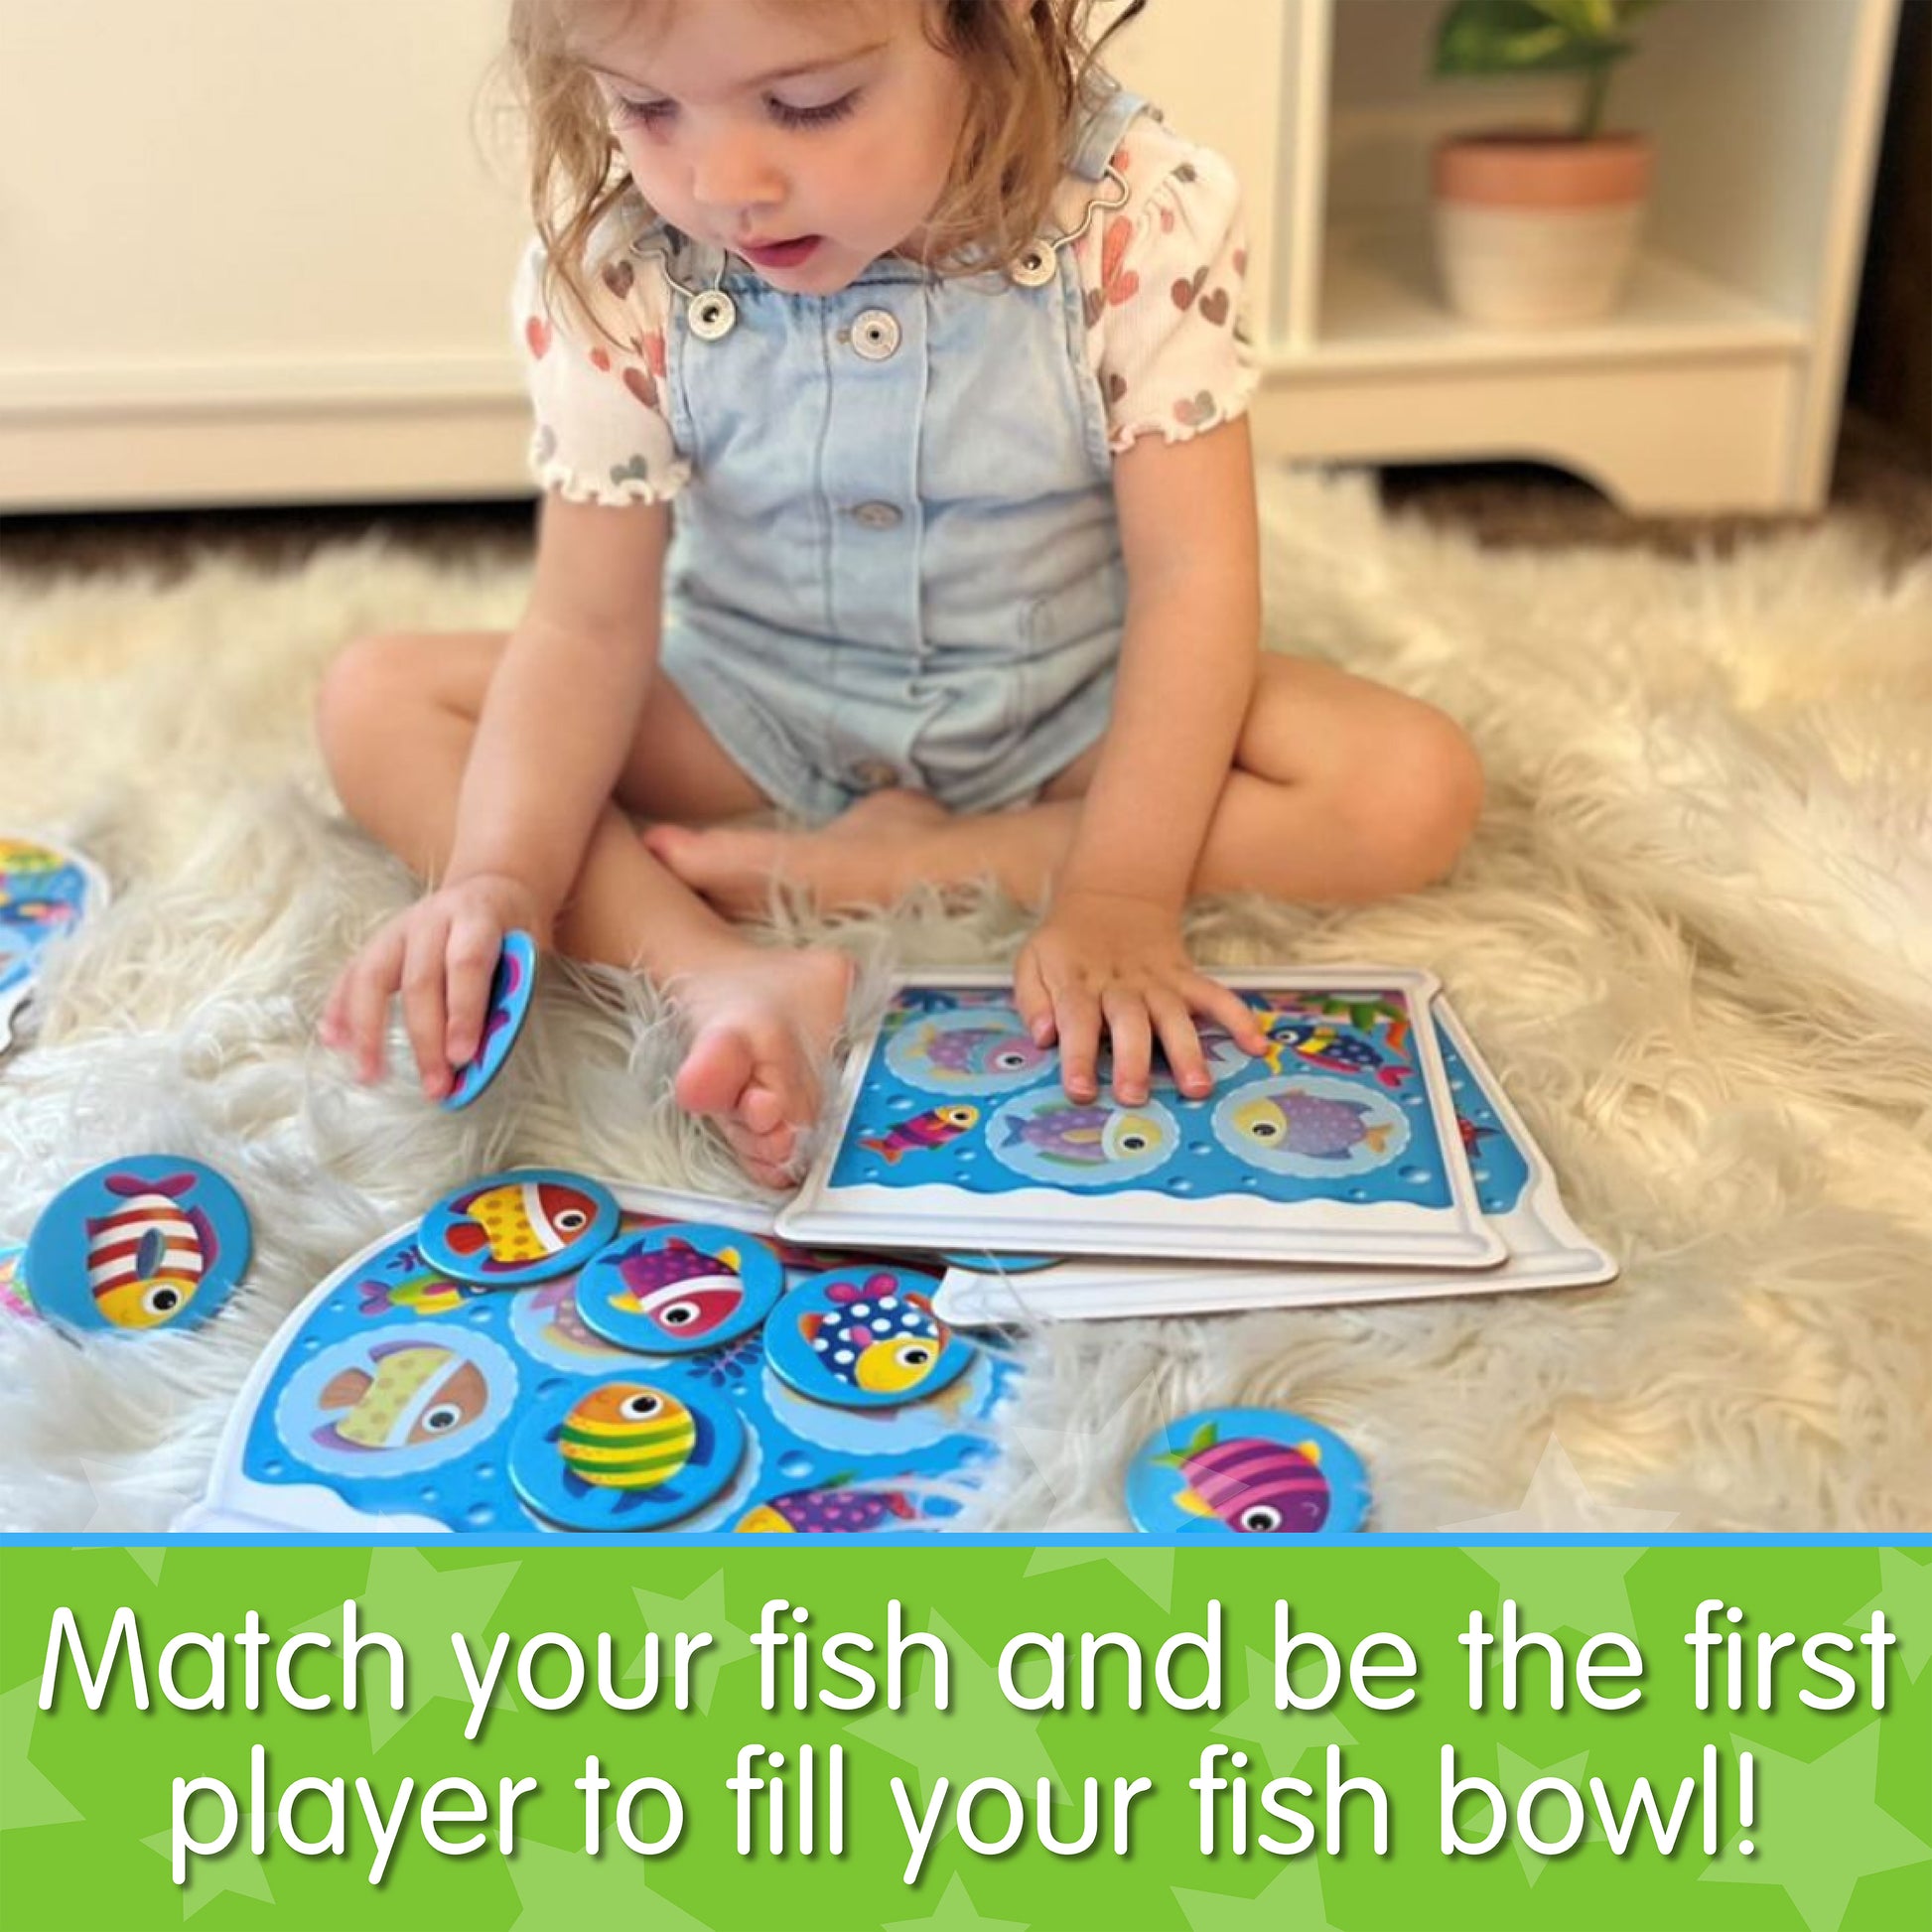 Infographic with little girl playing My First Play It - Match My Fish that says, "Match your fish and be the first player to fill your fish bowl!"